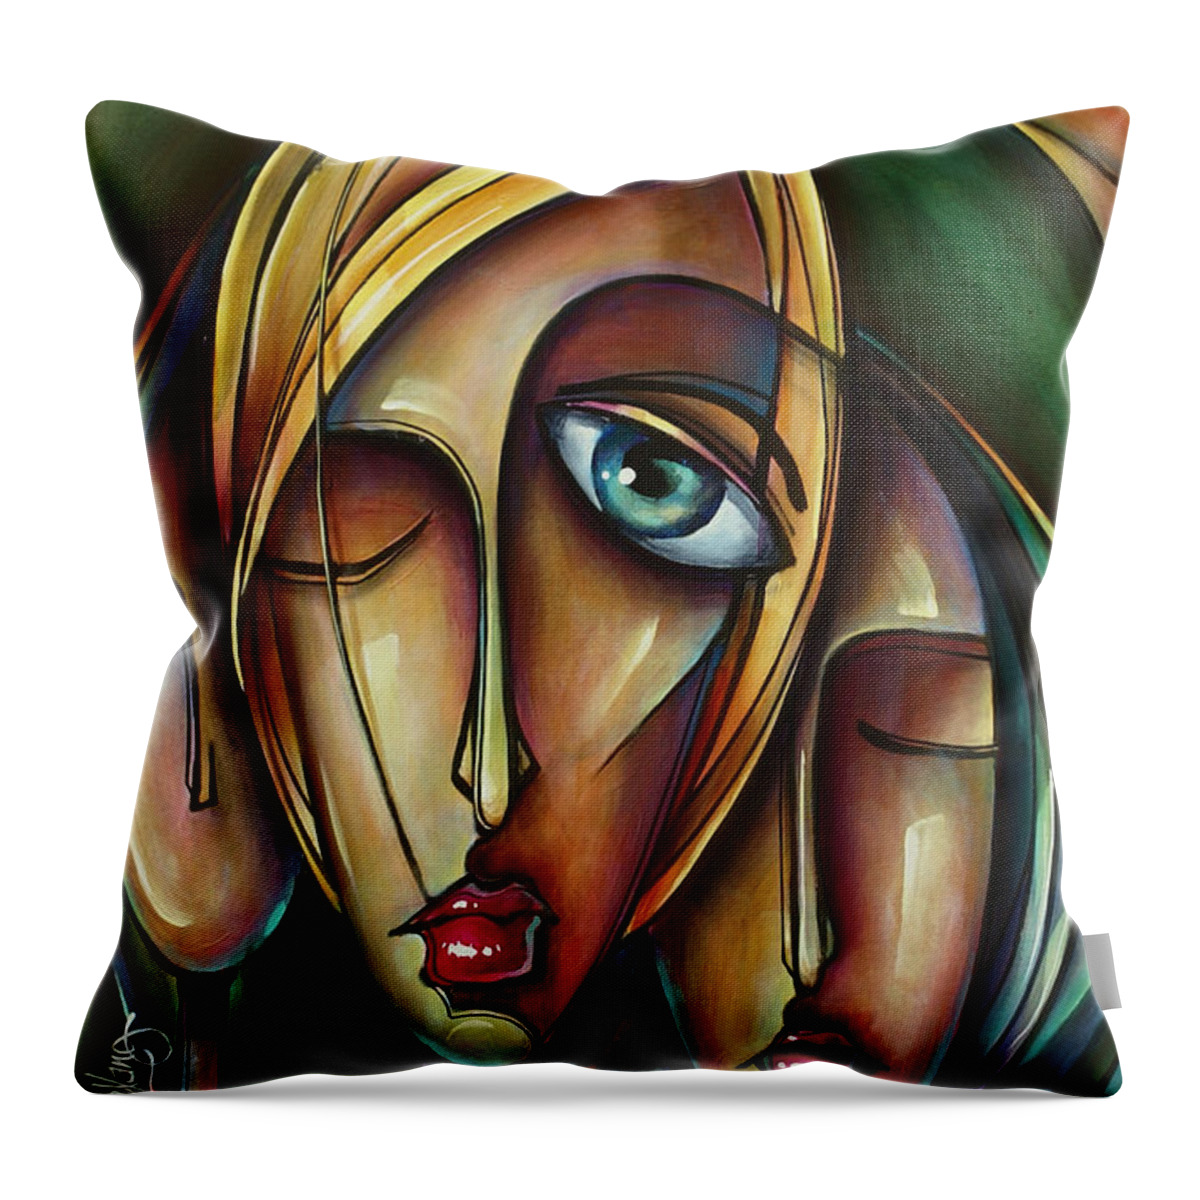 Urban Expressions Throw Pillow featuring the painting Dream Catchers by Michael Lang